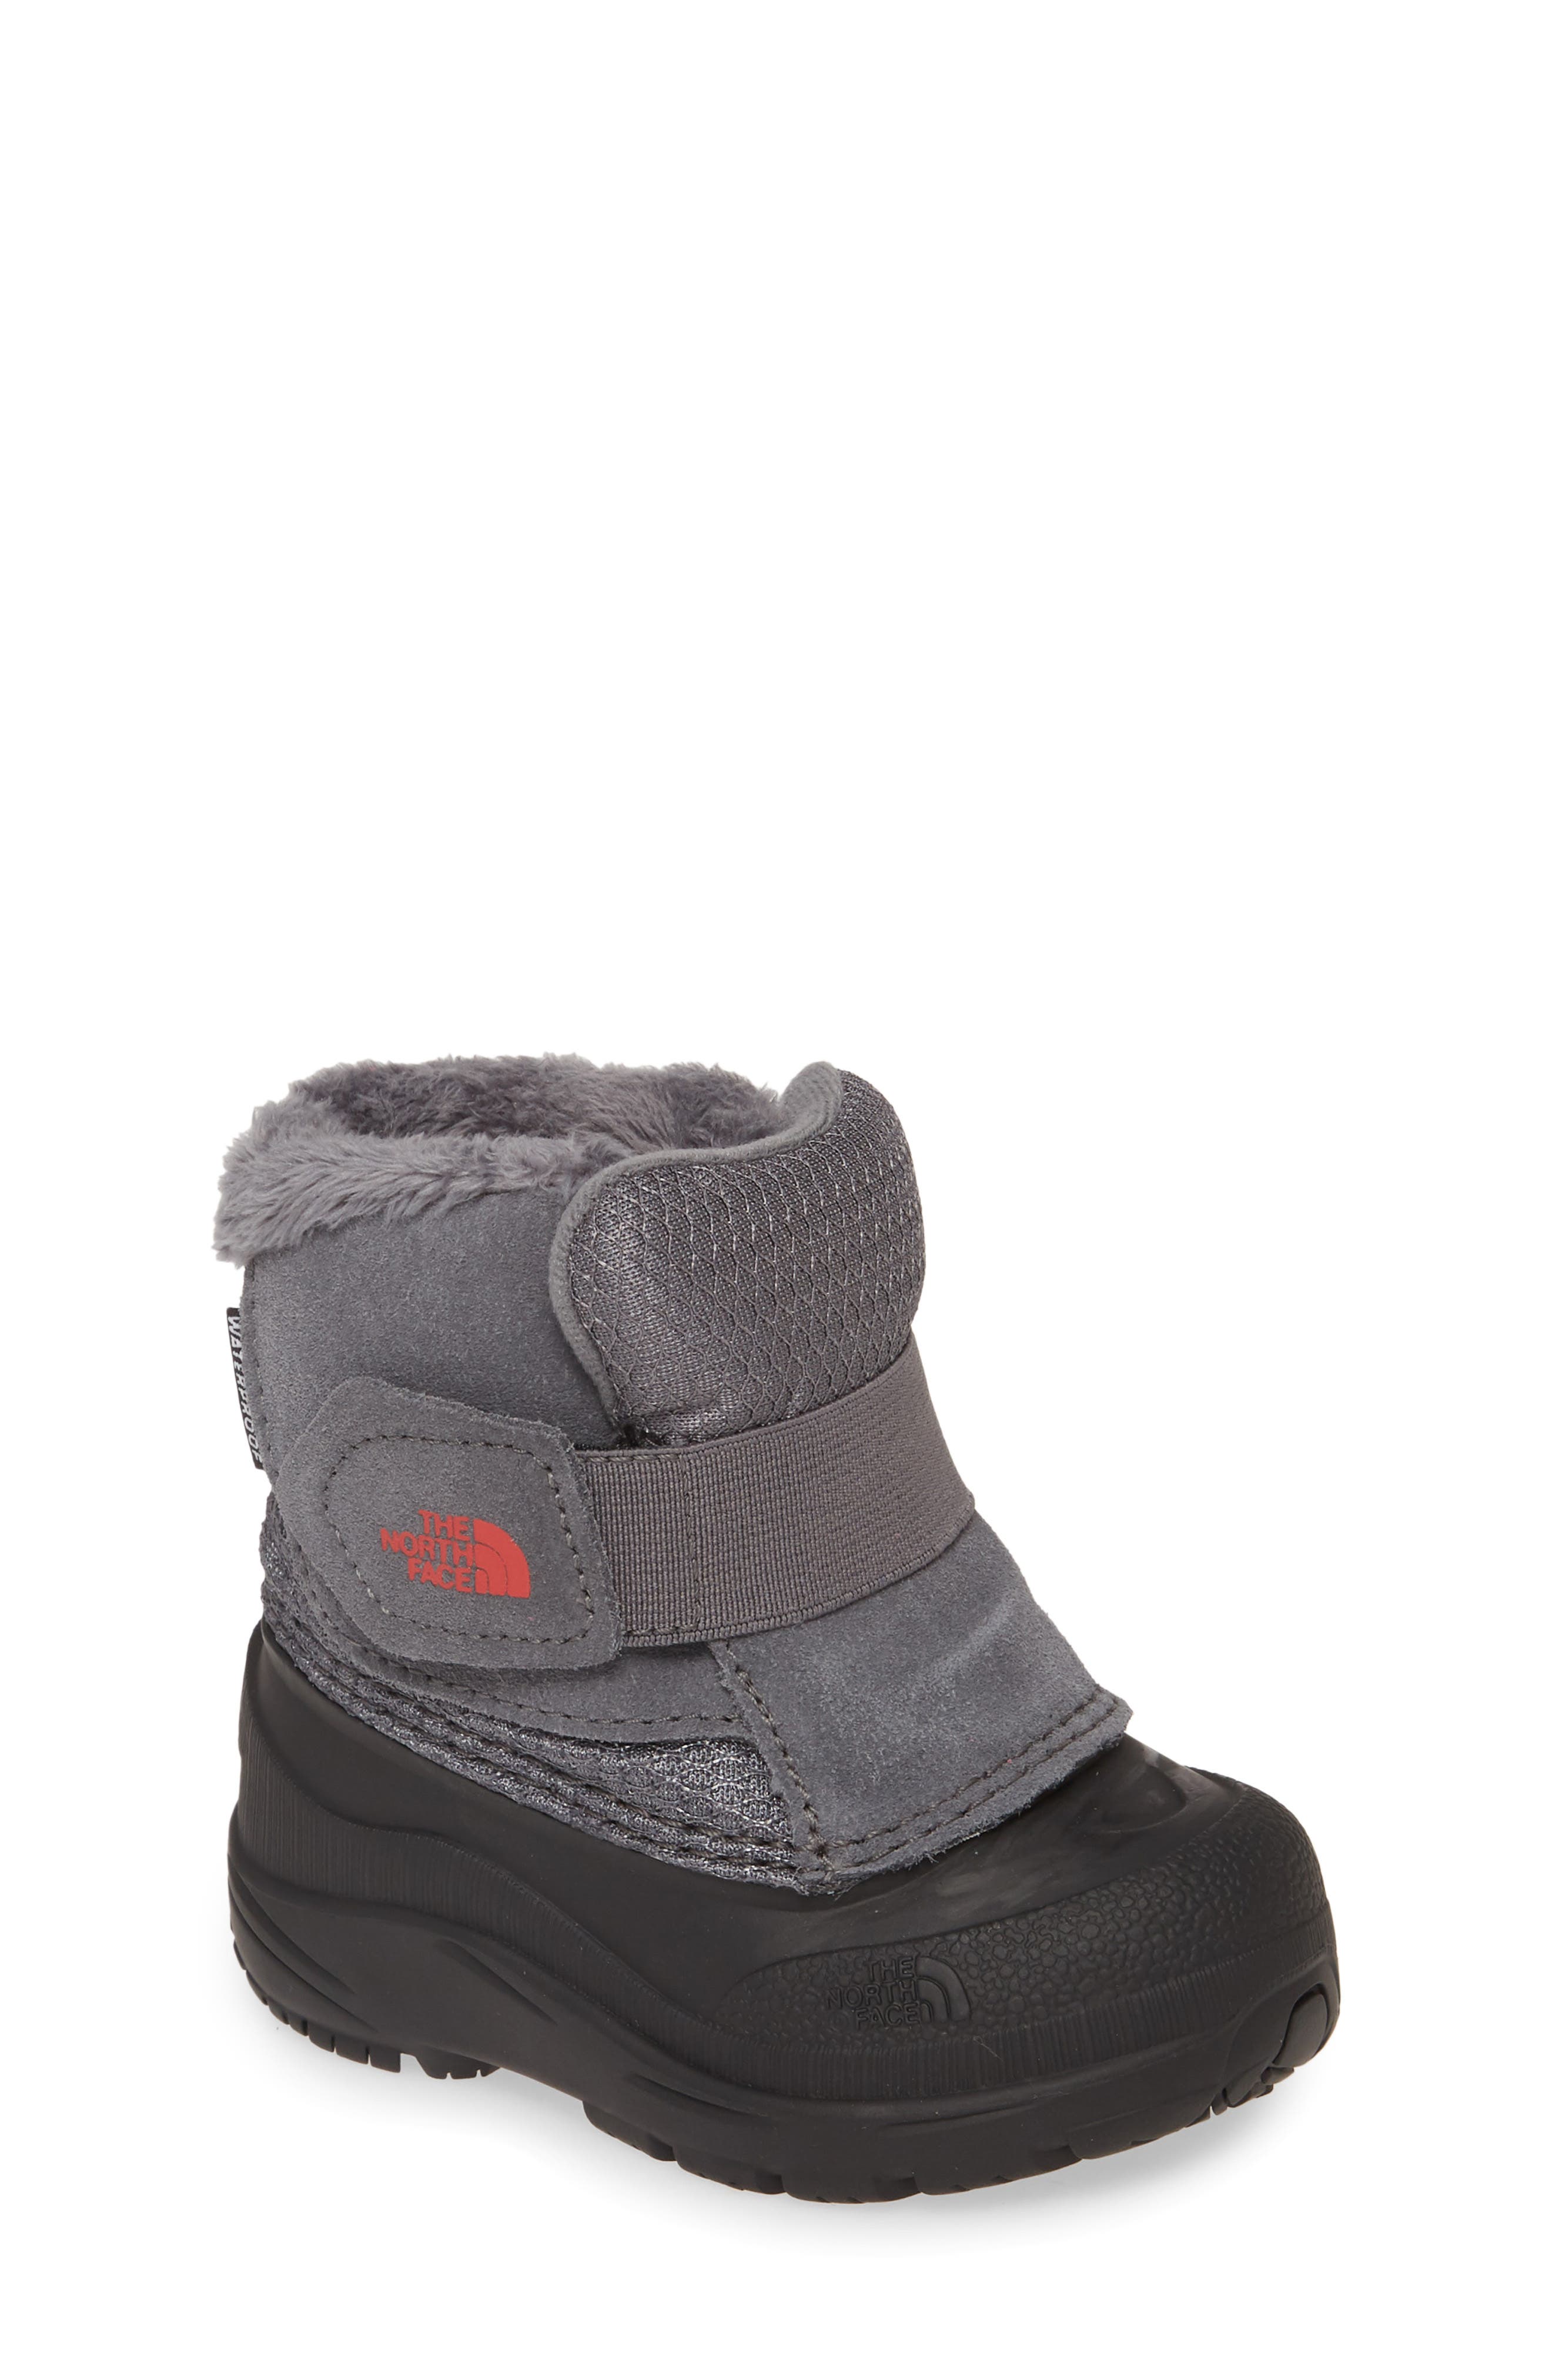 north face baby shoes